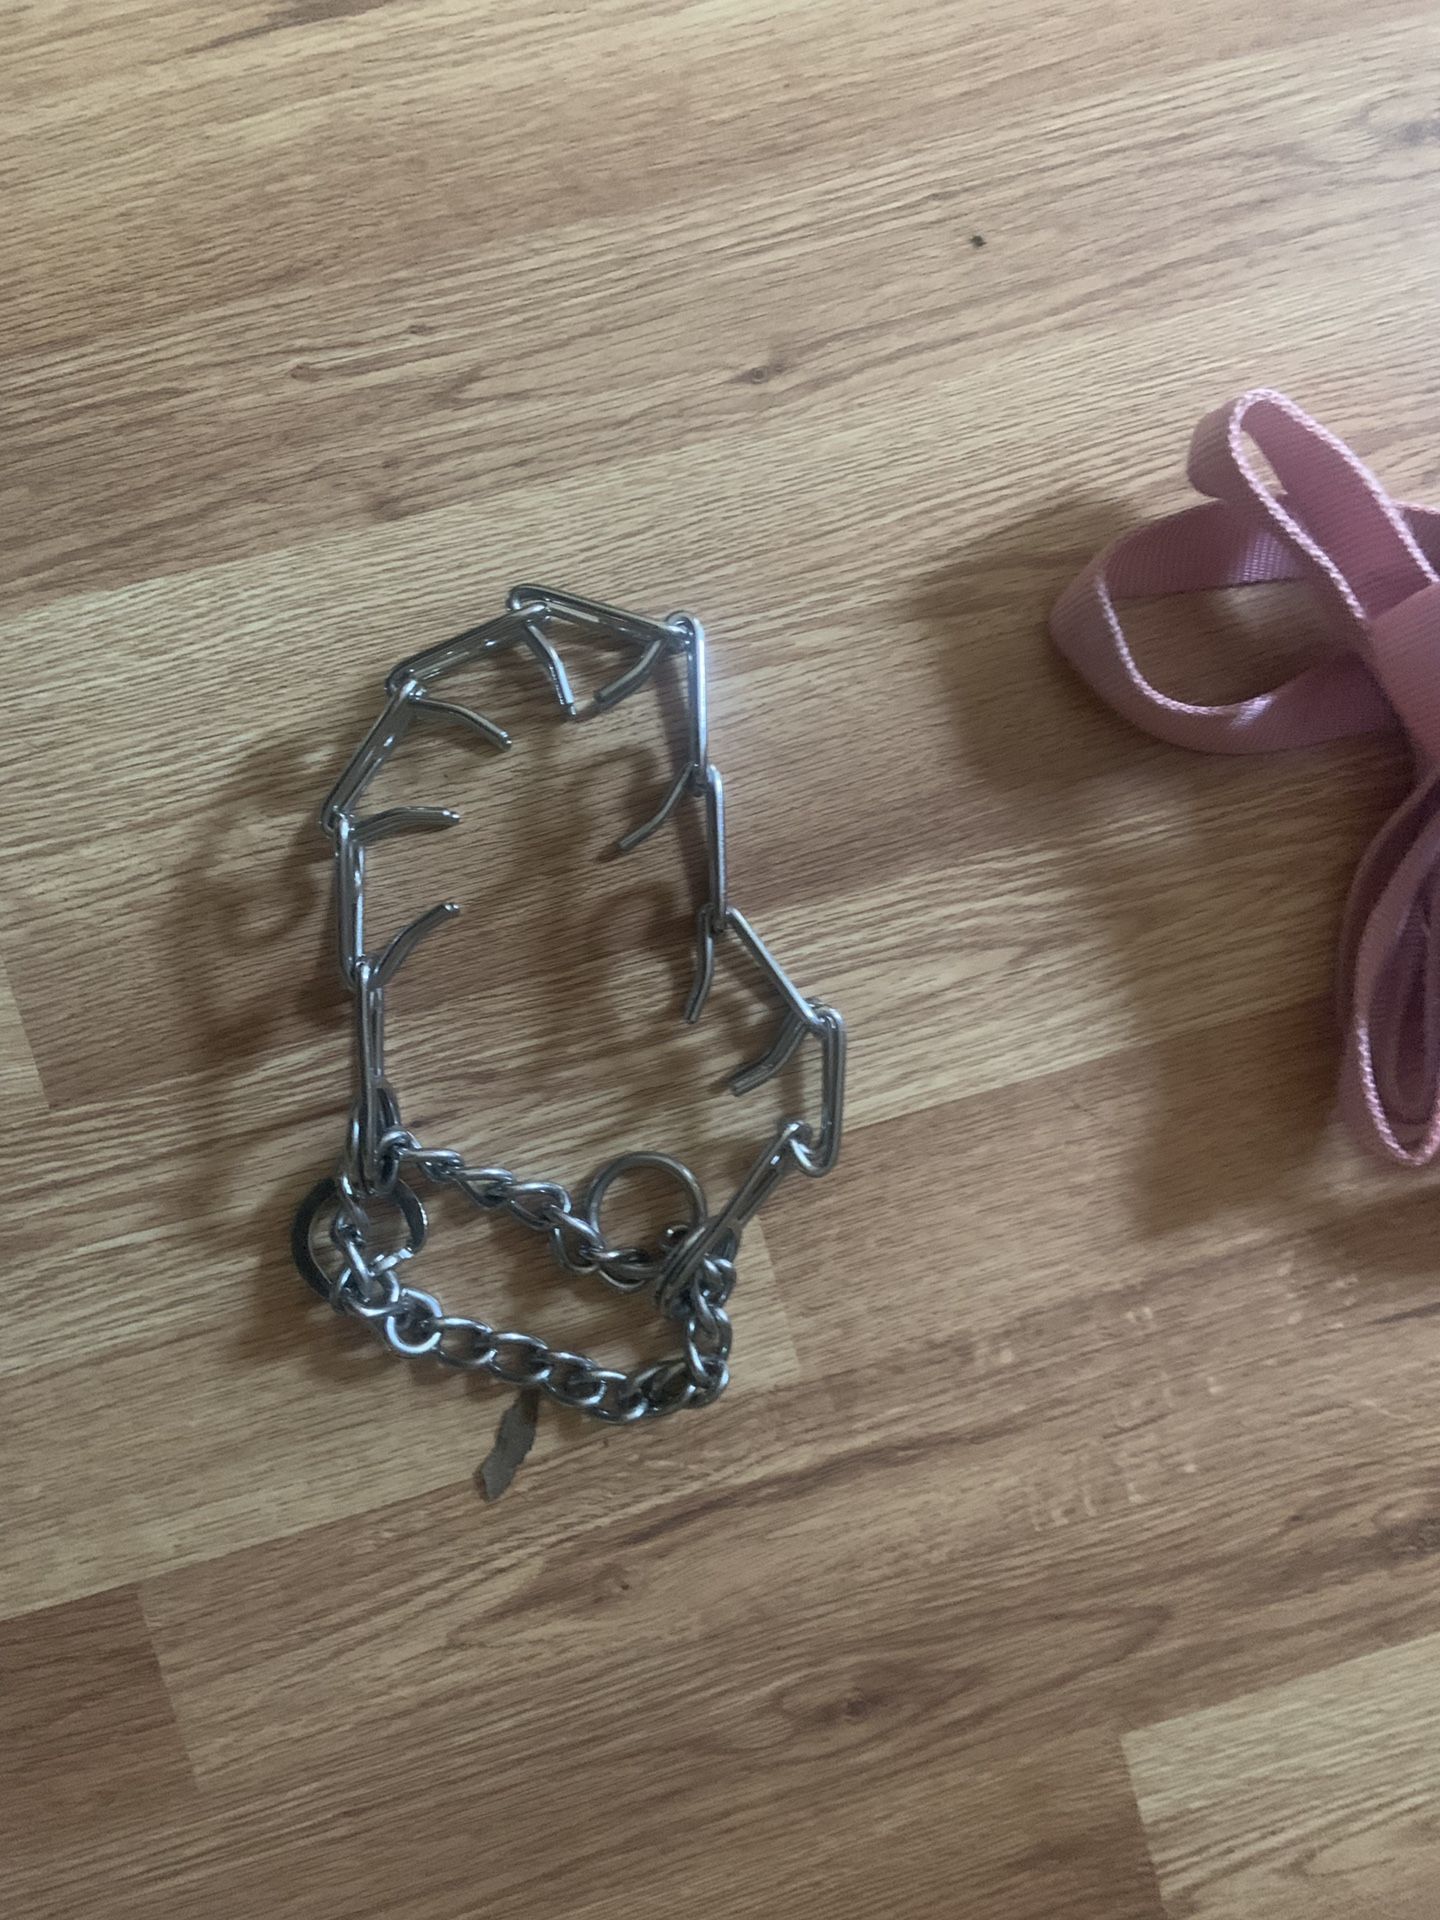 Large dog cage, Training collar ,leash and harness